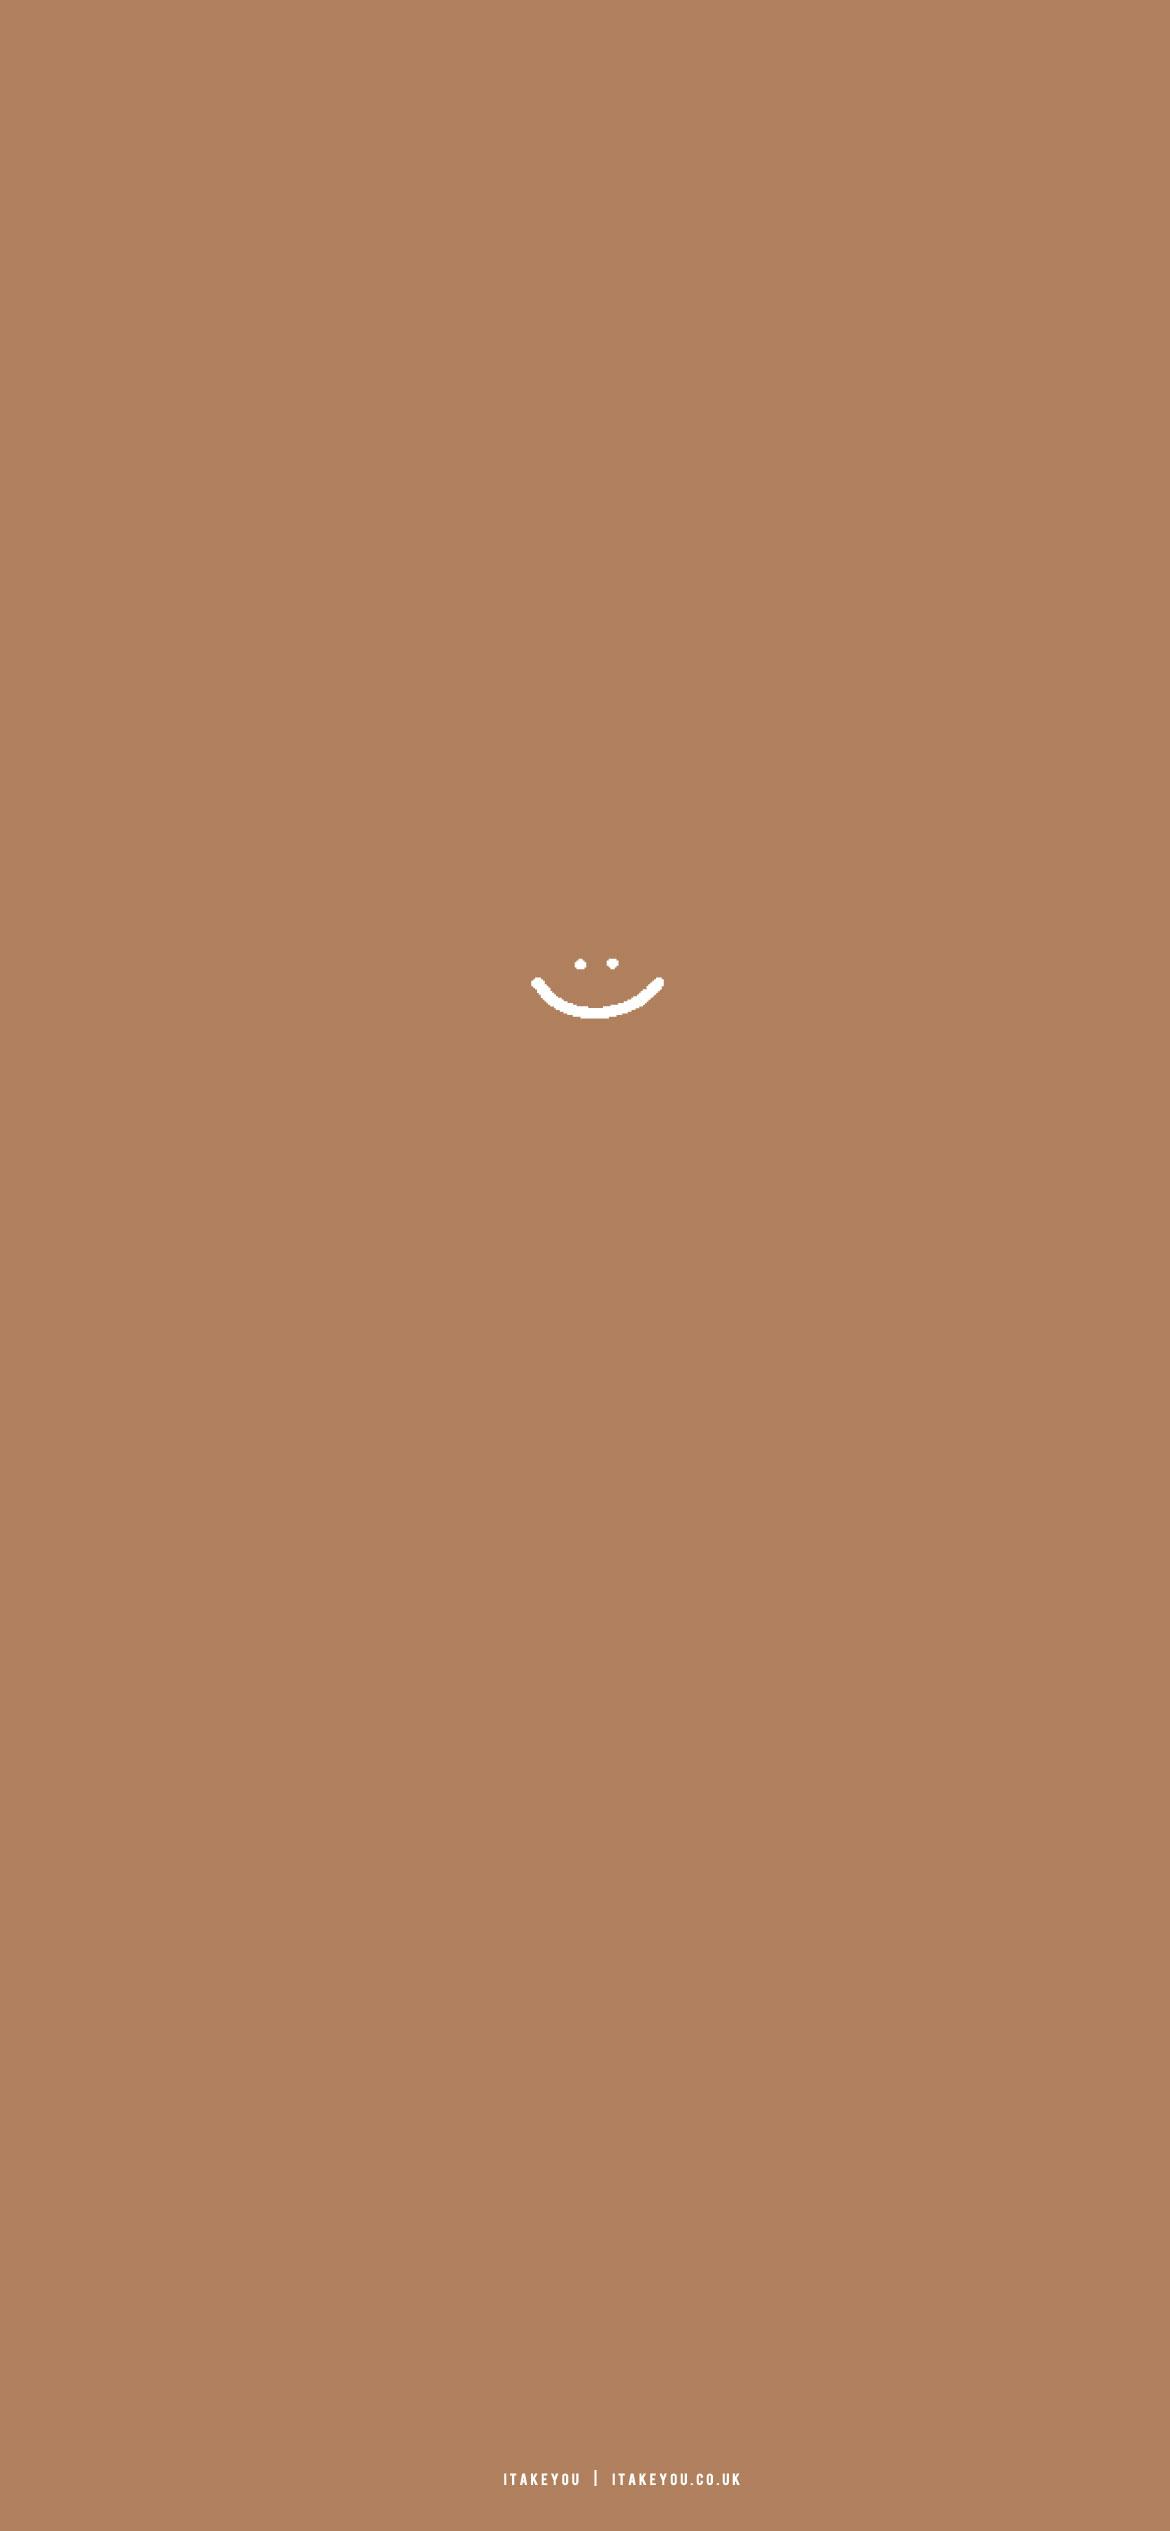 20 Minimalist Brown Wallpaper iPhone Ideas for iPhone Smile I